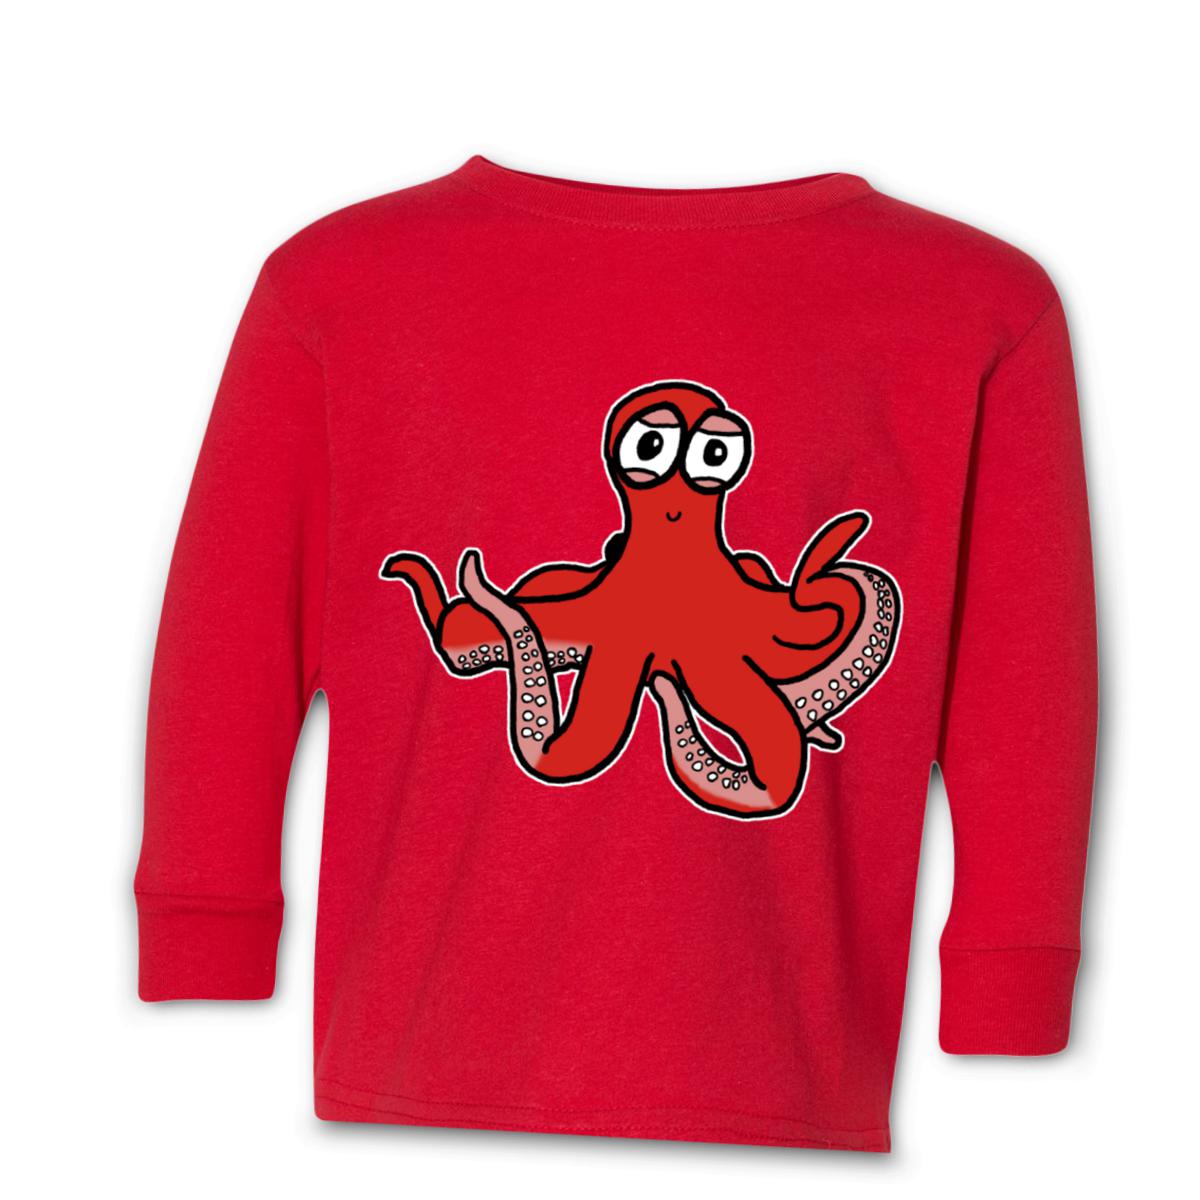 Octopus Toddler Long Sleeve Tee 56T red